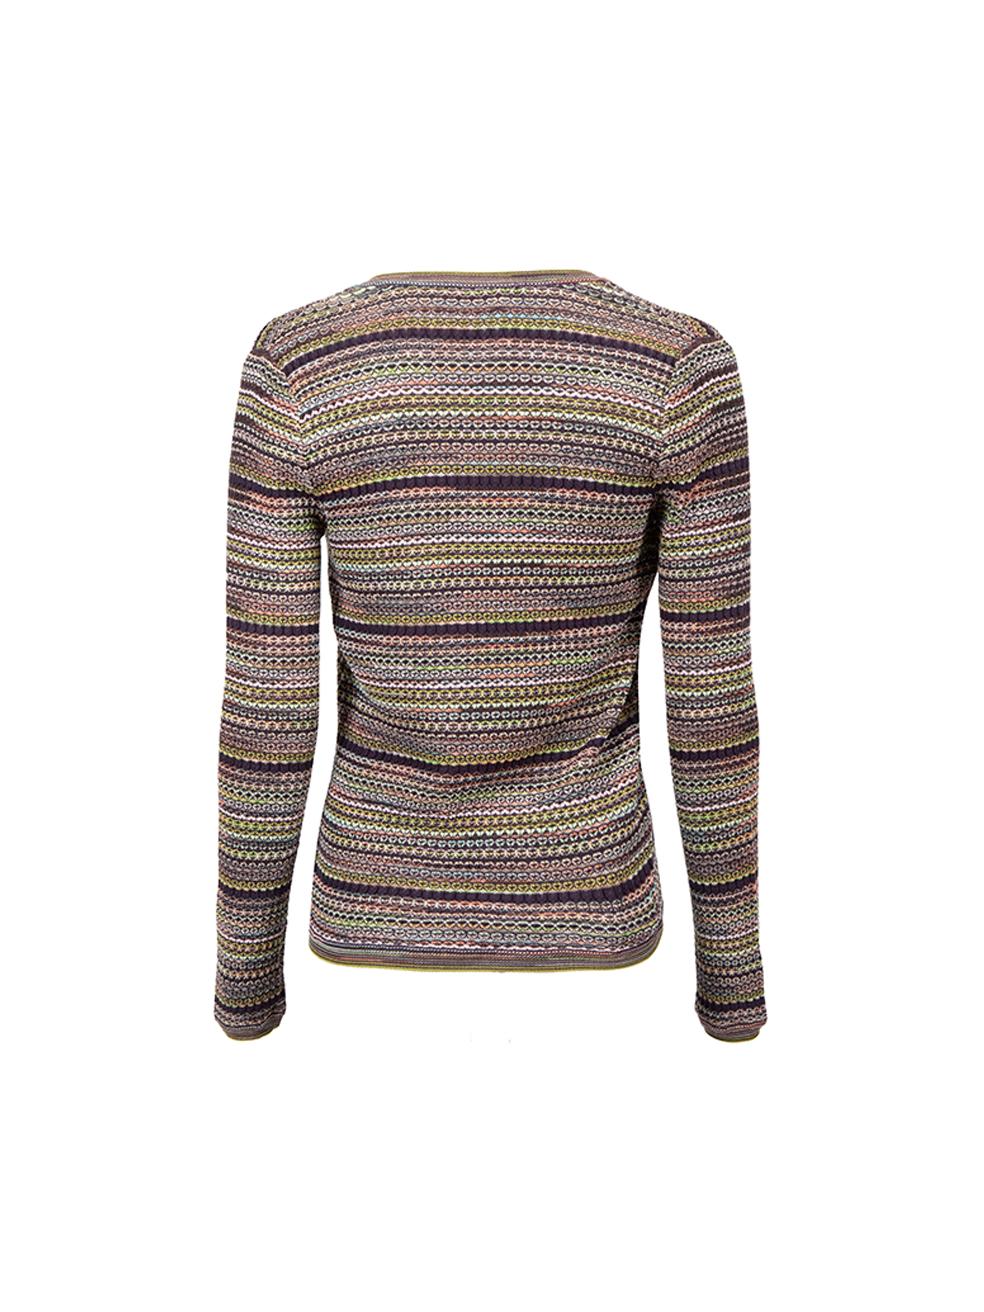 Missoni Women's Wool & Silk Blend Striped Cardigan In Good Condition For Sale In London, GB